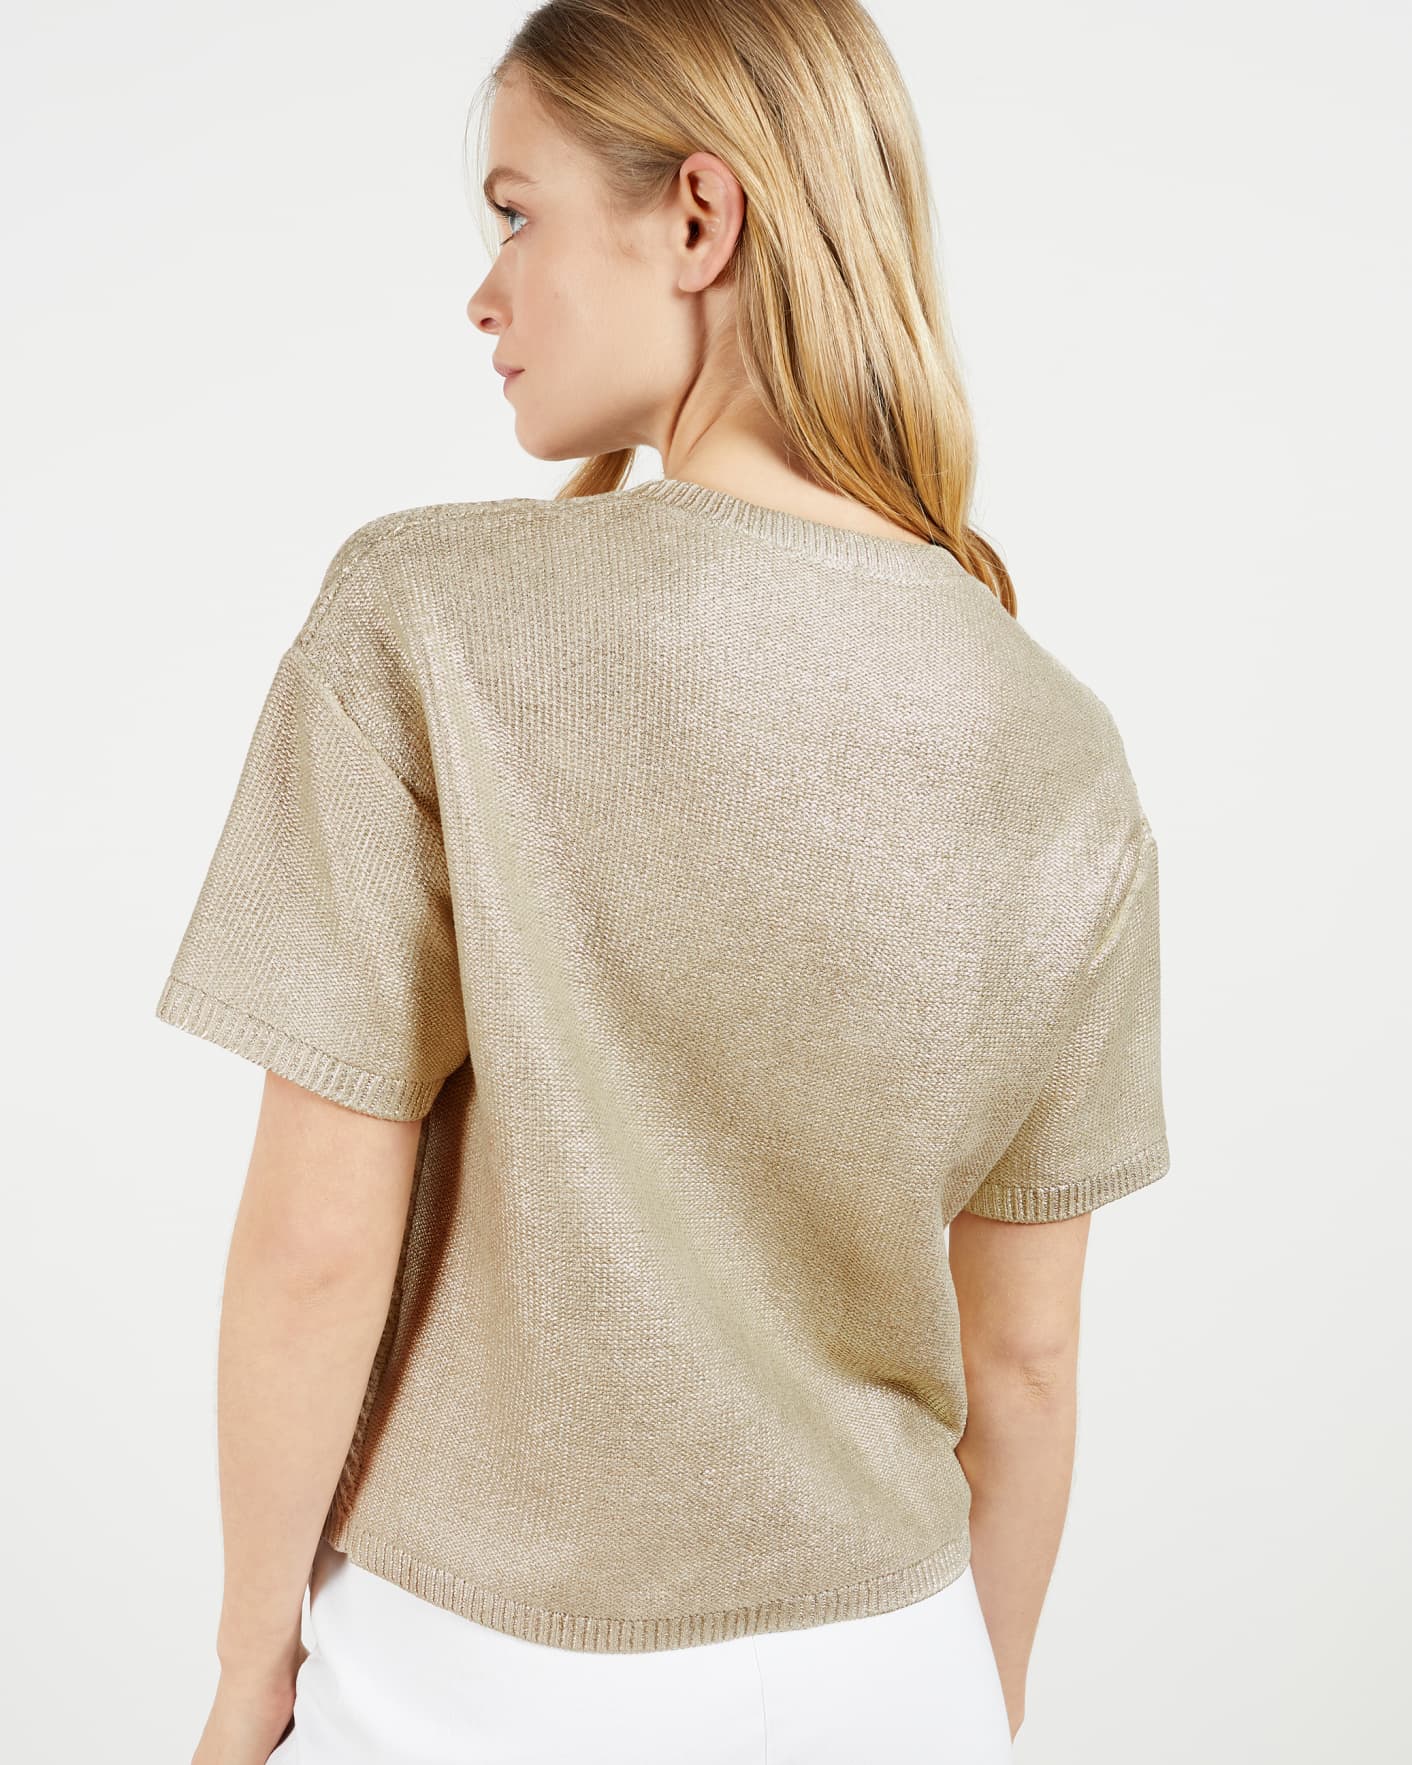 Metallic Relaxed Metallic Knitted Top Ted Baker